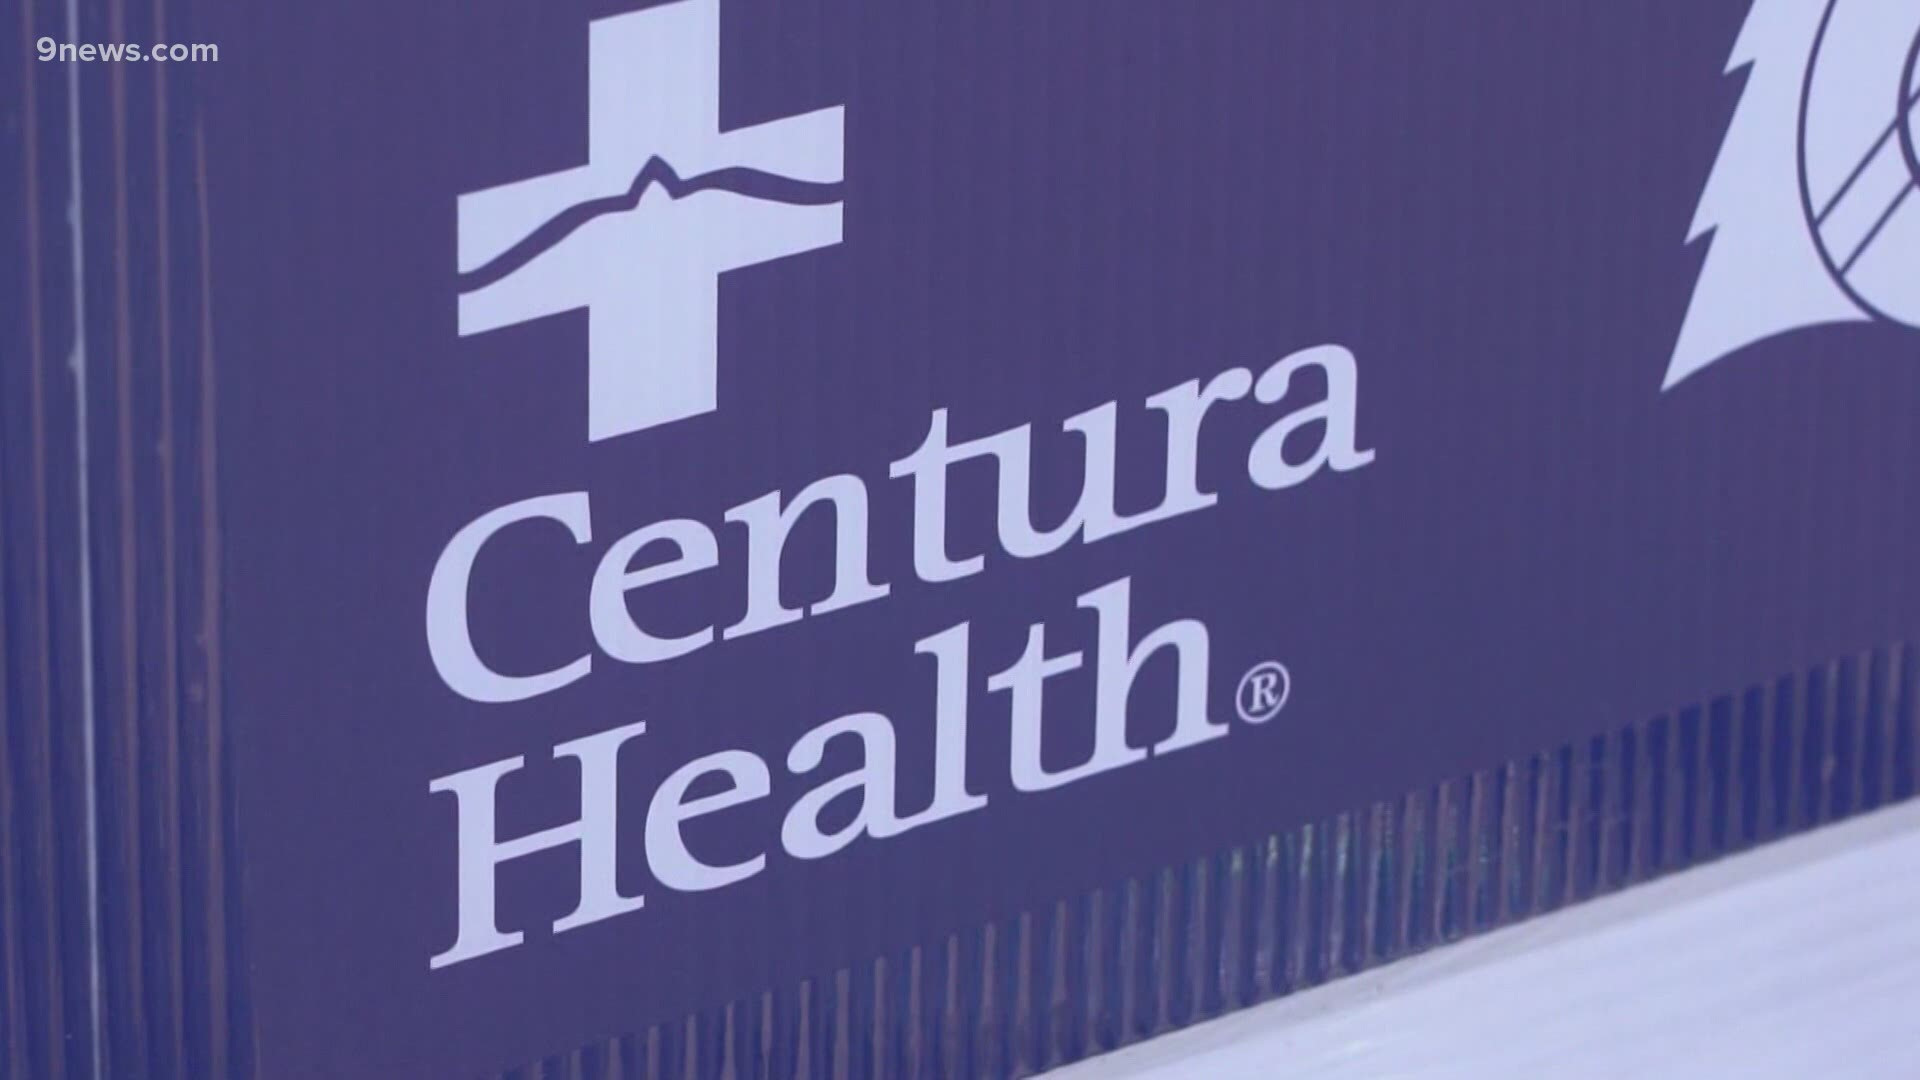 Centura said the change is due to the shortage in the Johnson & Johnson vaccine, as well as recent adverse reactions to it.